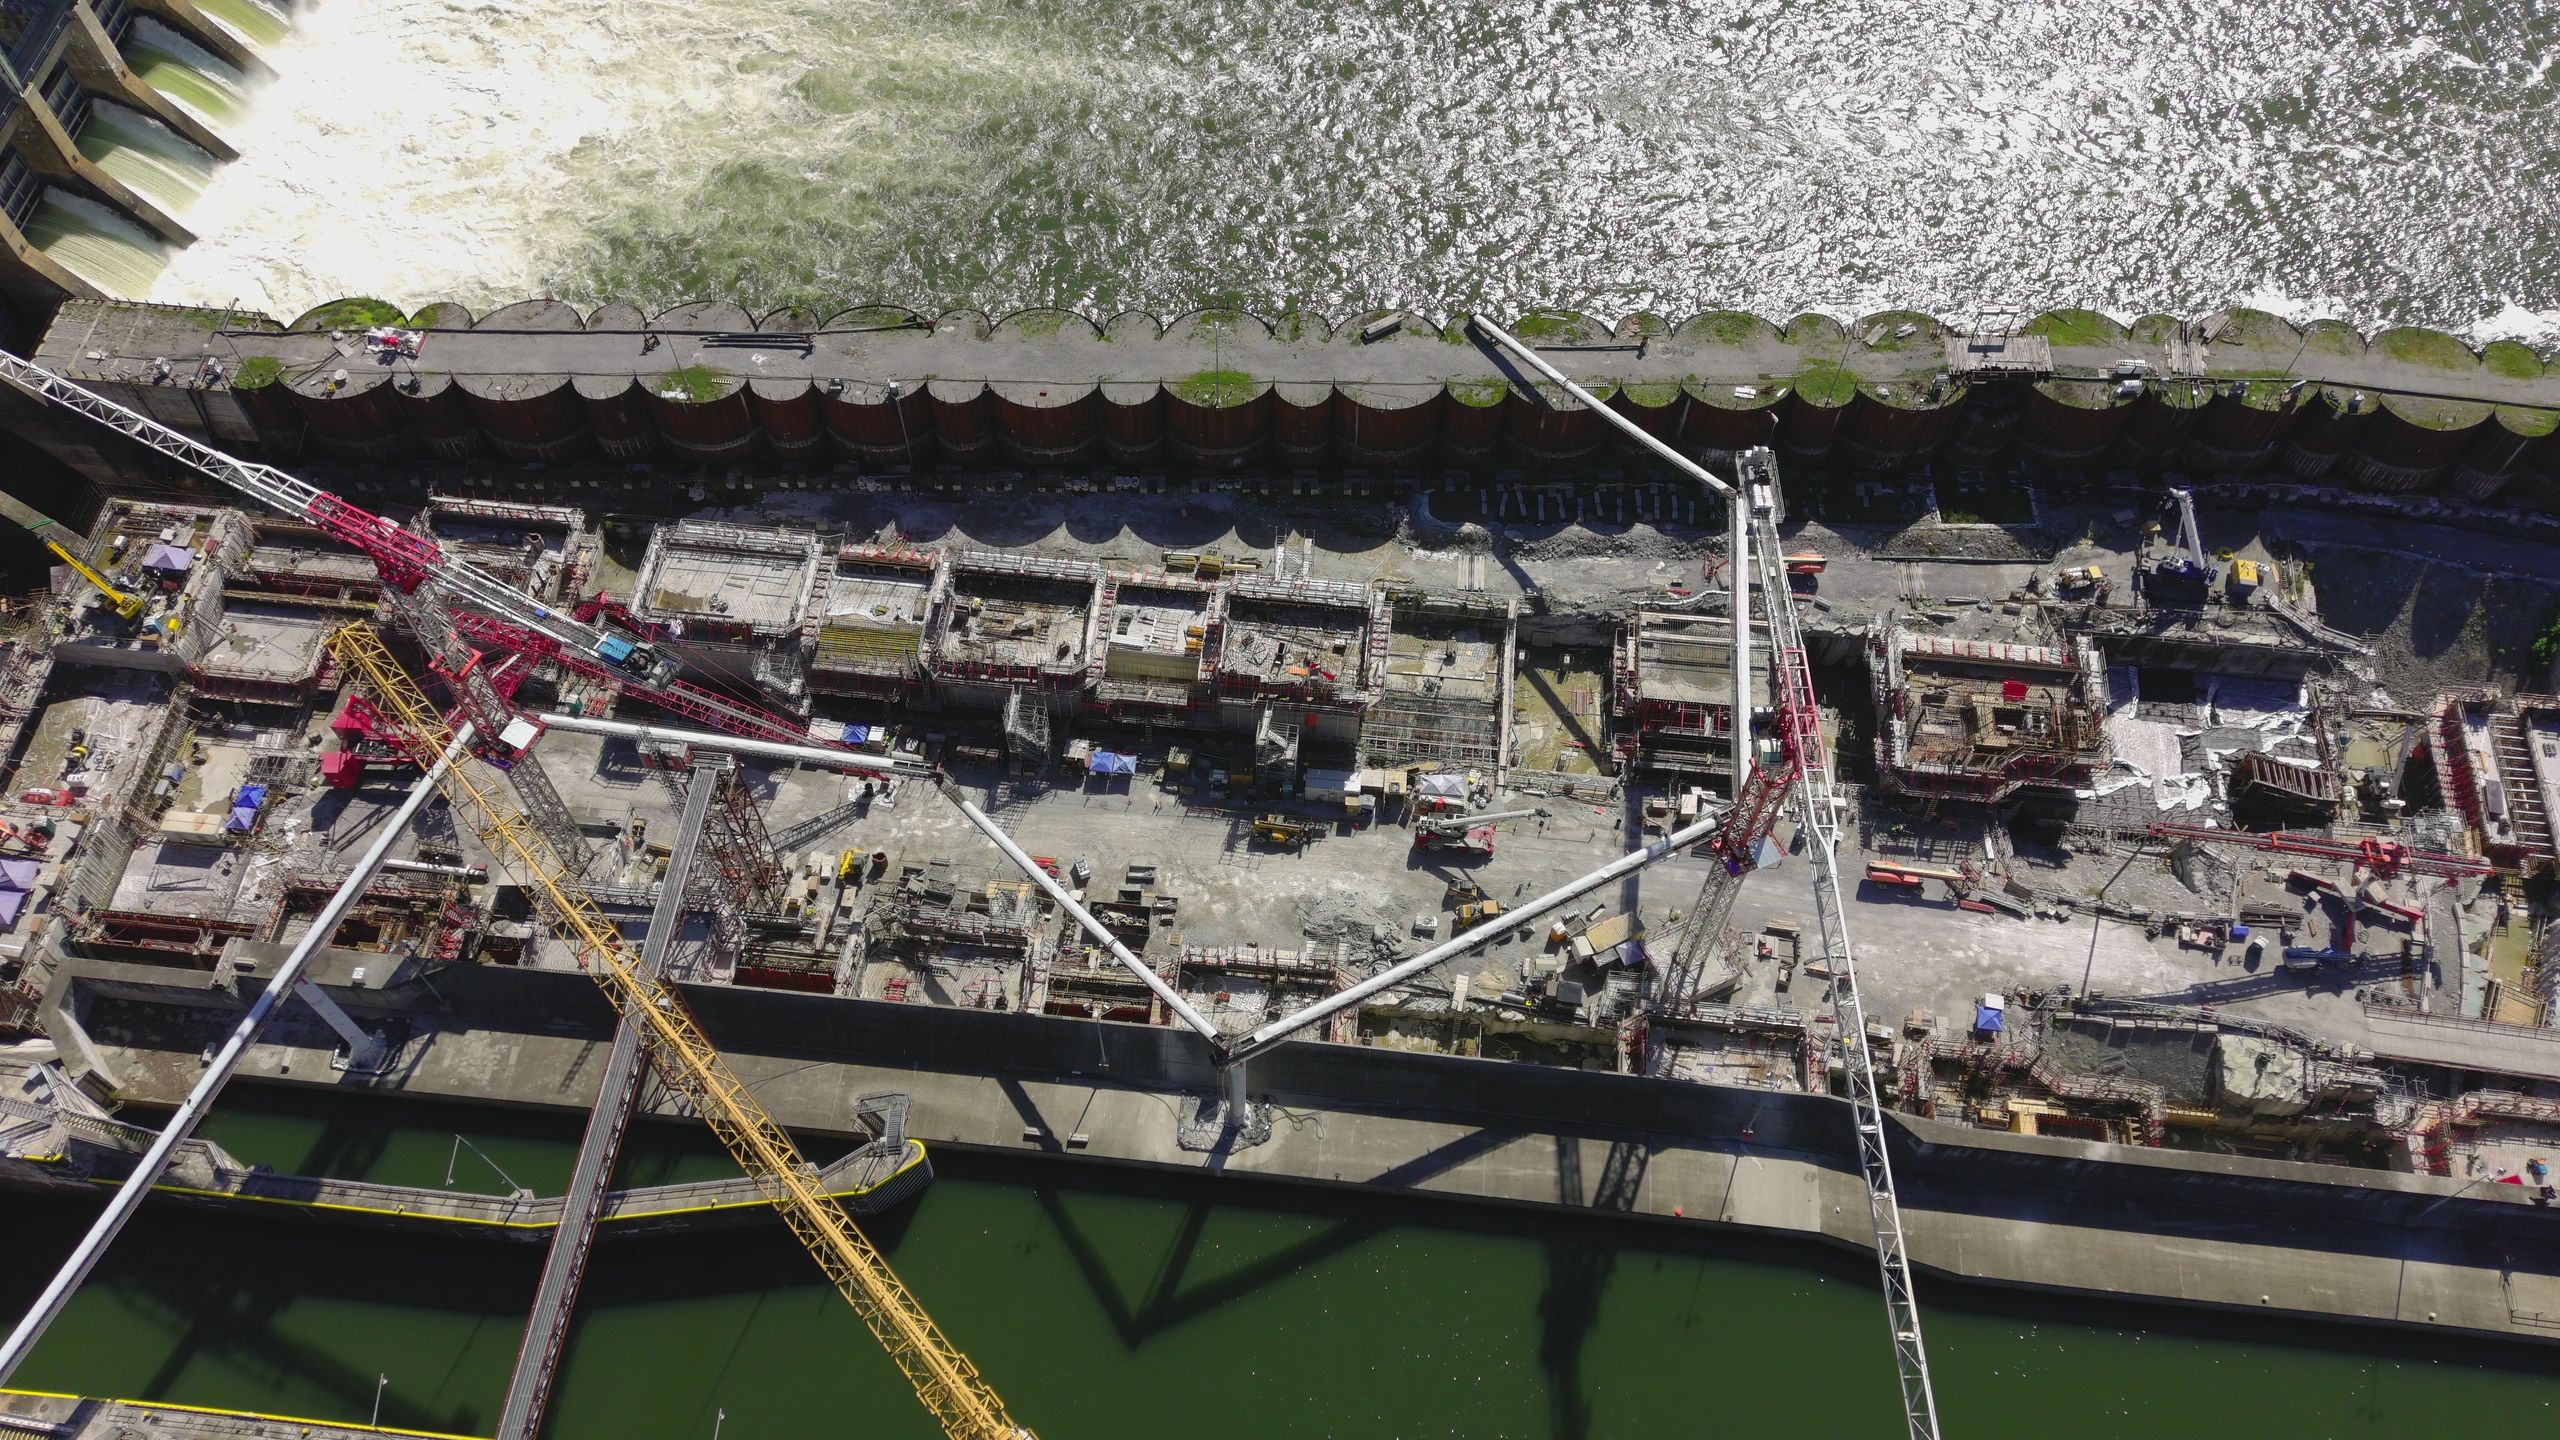 Inside the cofferdam the new lock construction is taking shape.
2017-10-17